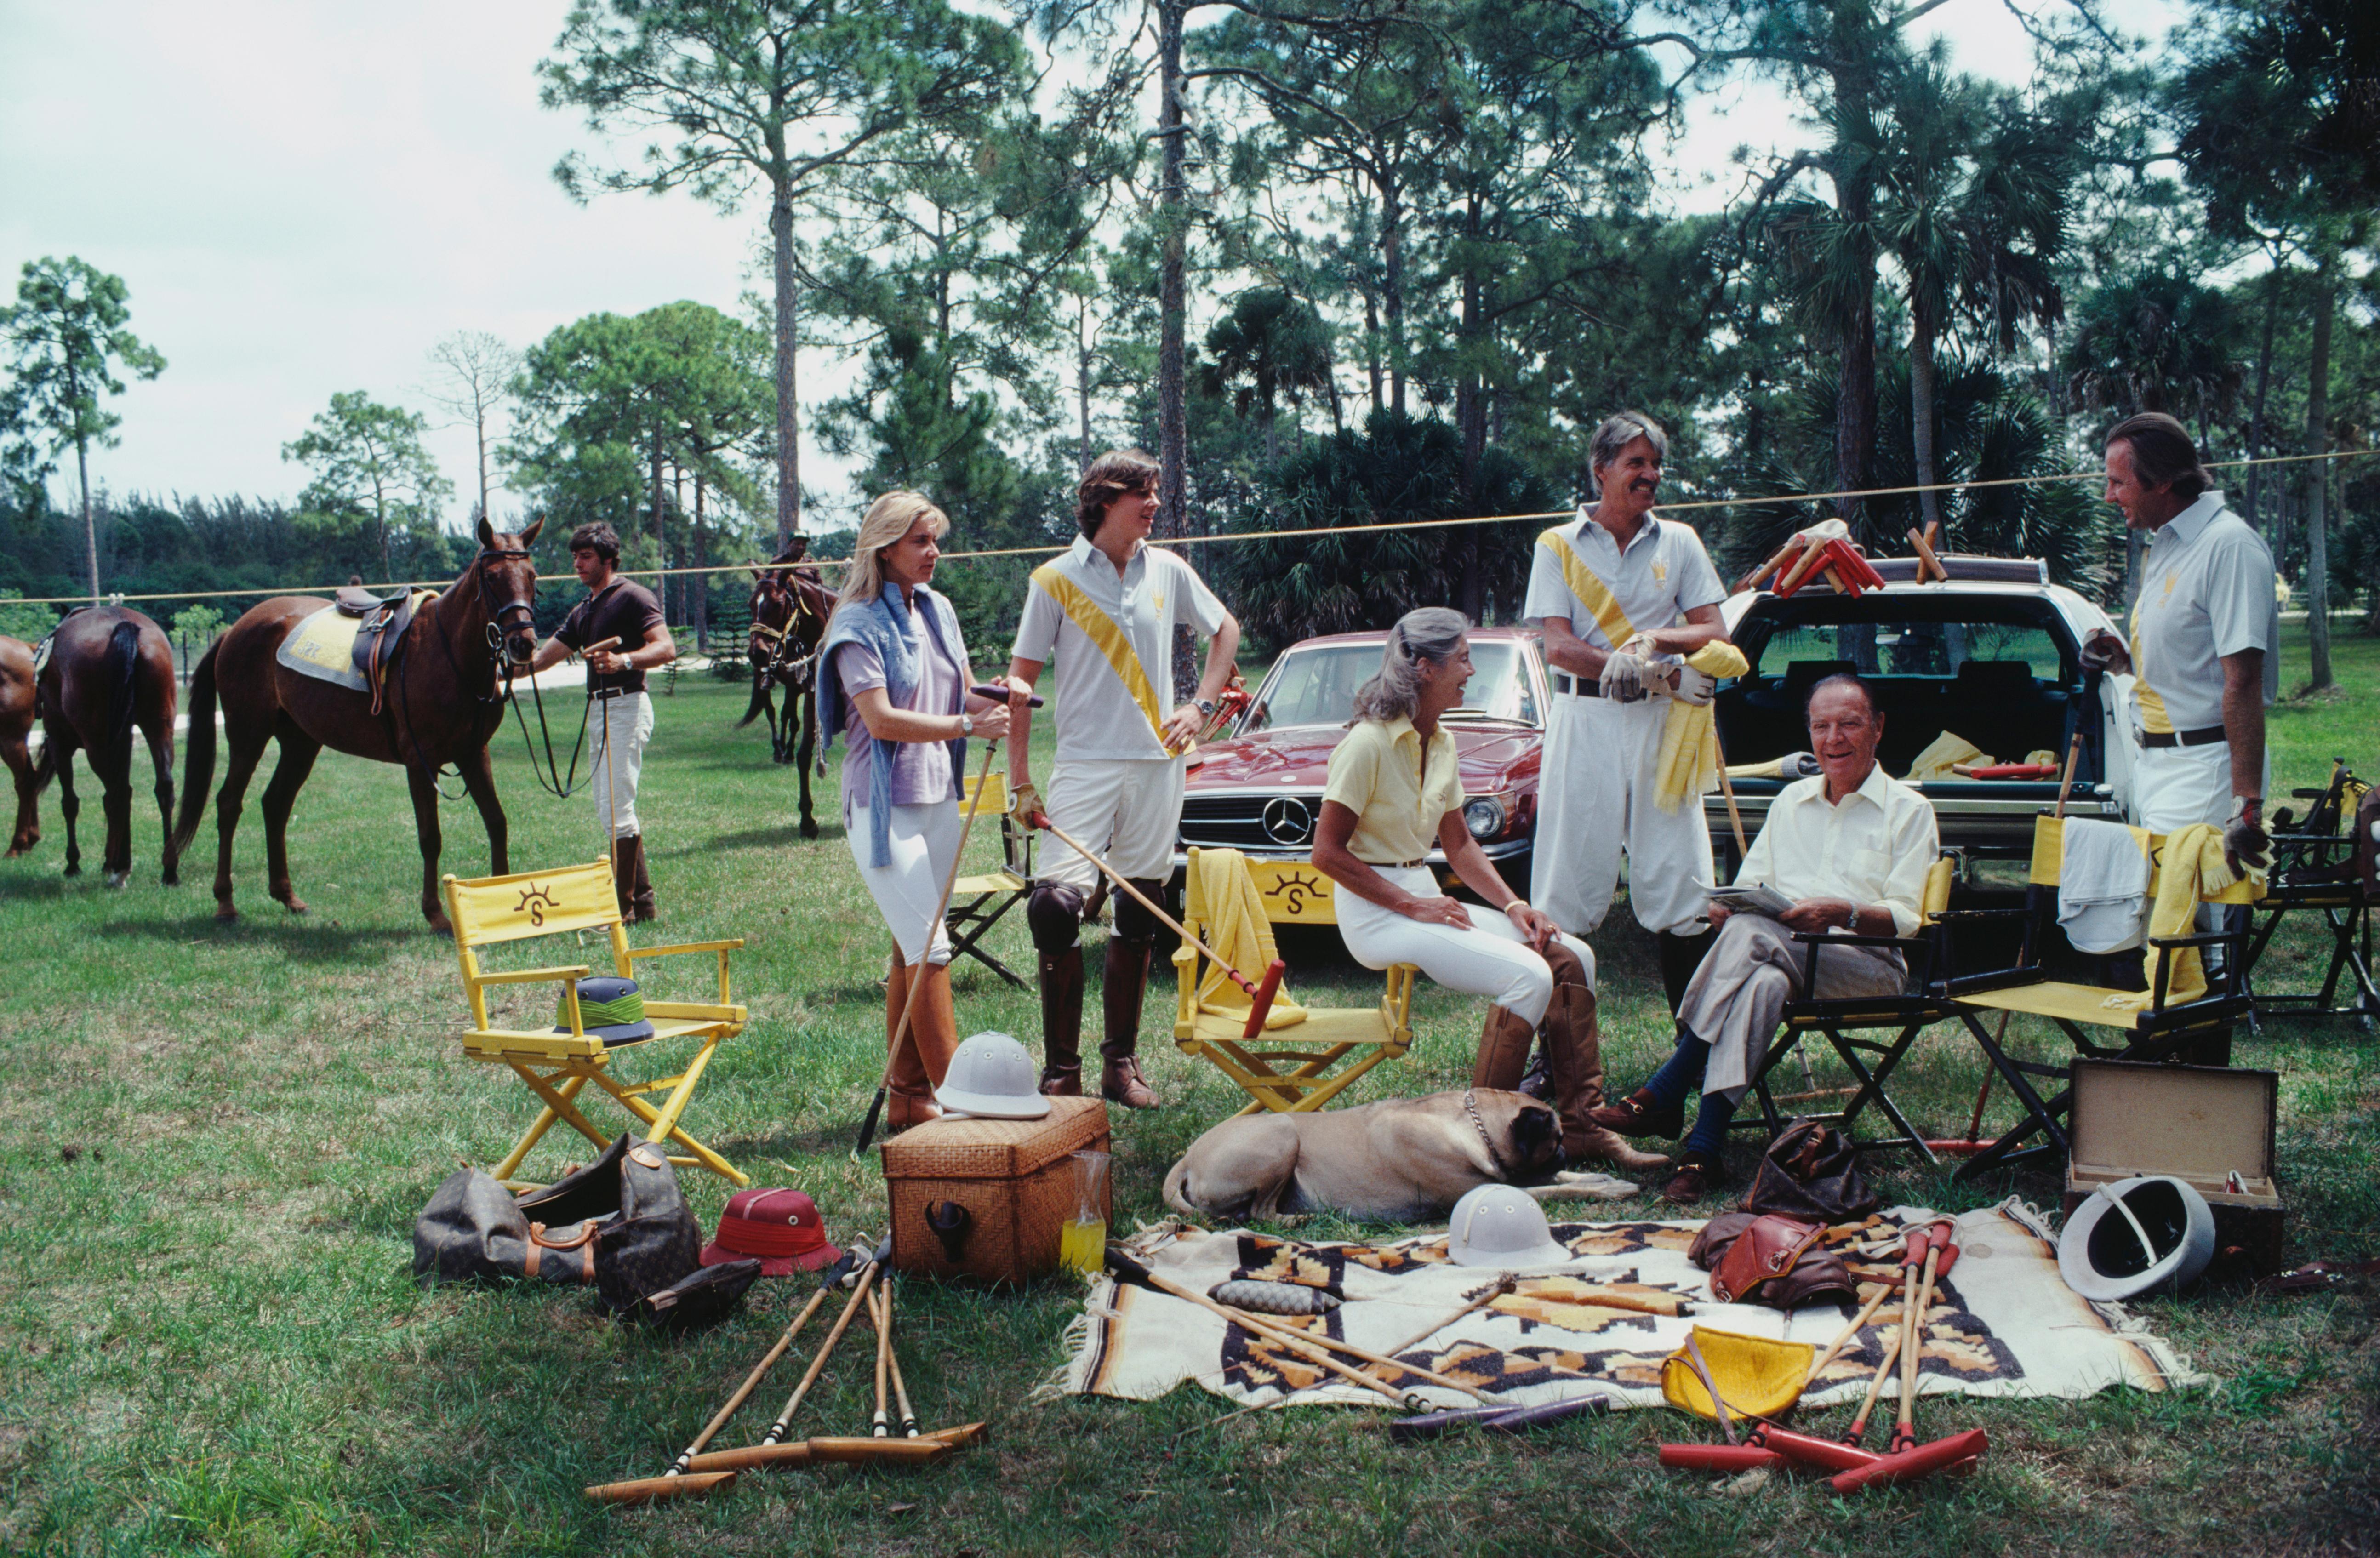 Paul Butler, patriarch of one of America’s foremost polo families, with his son, daughter, grandchildren and son-in-law, Palm Beach, April 1981. Left to right: Adam Butler, Reutie Butler Shober, Jorie and Michael Butler Kent, Paul Butler and